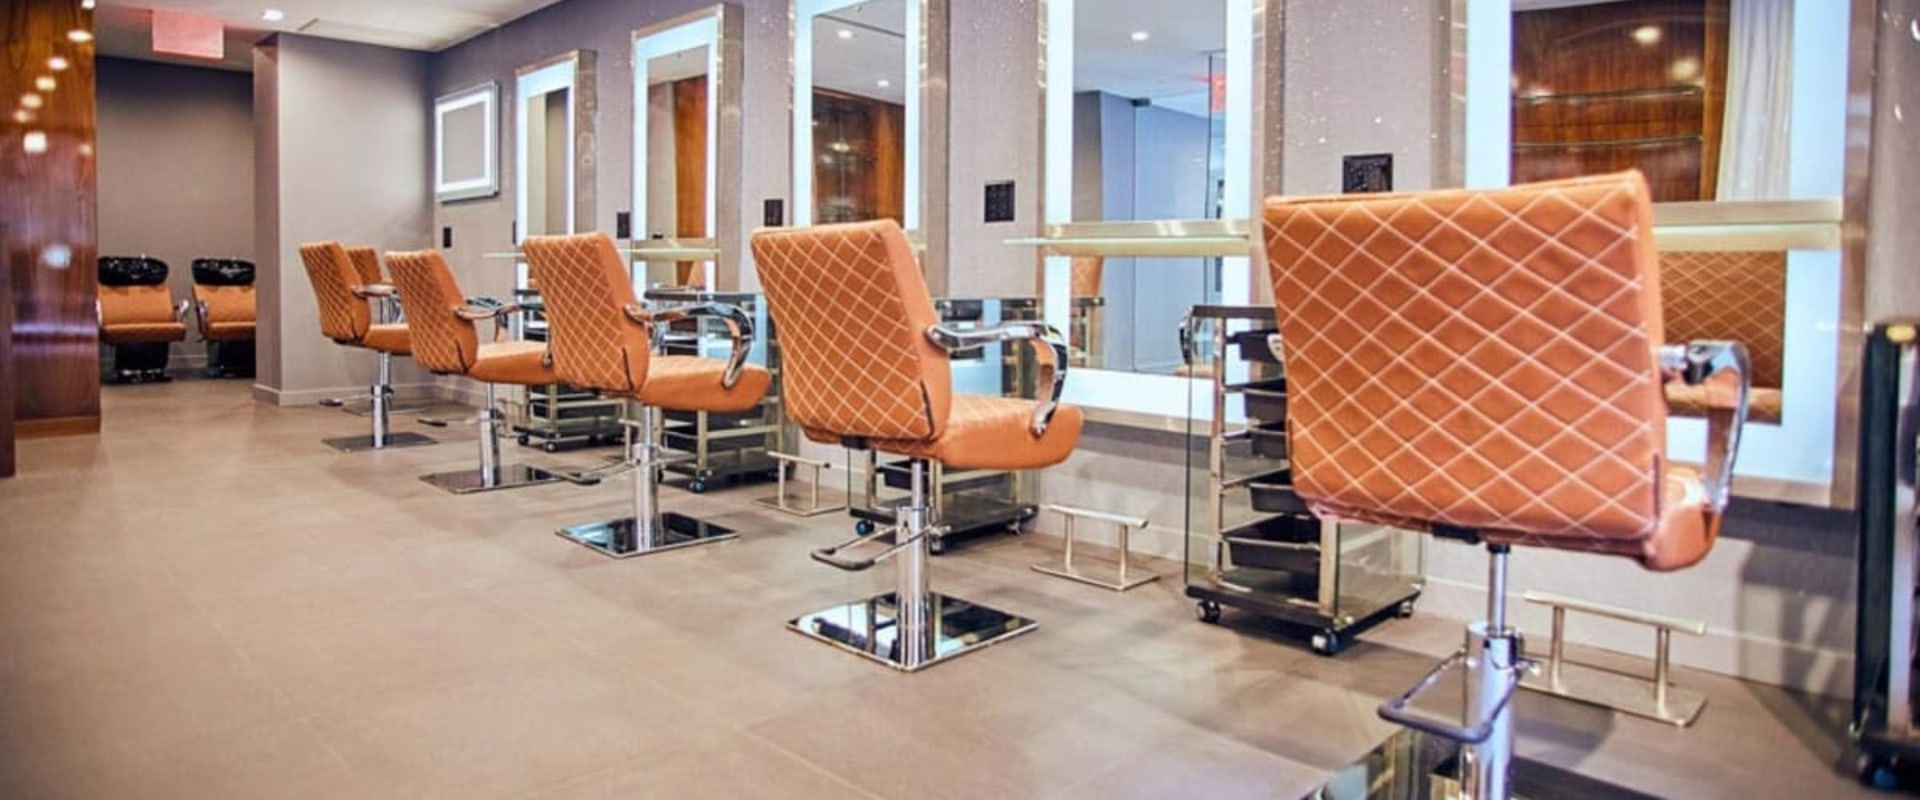 The Best Salons in Buffalo, NY for Blowouts and Styling Services